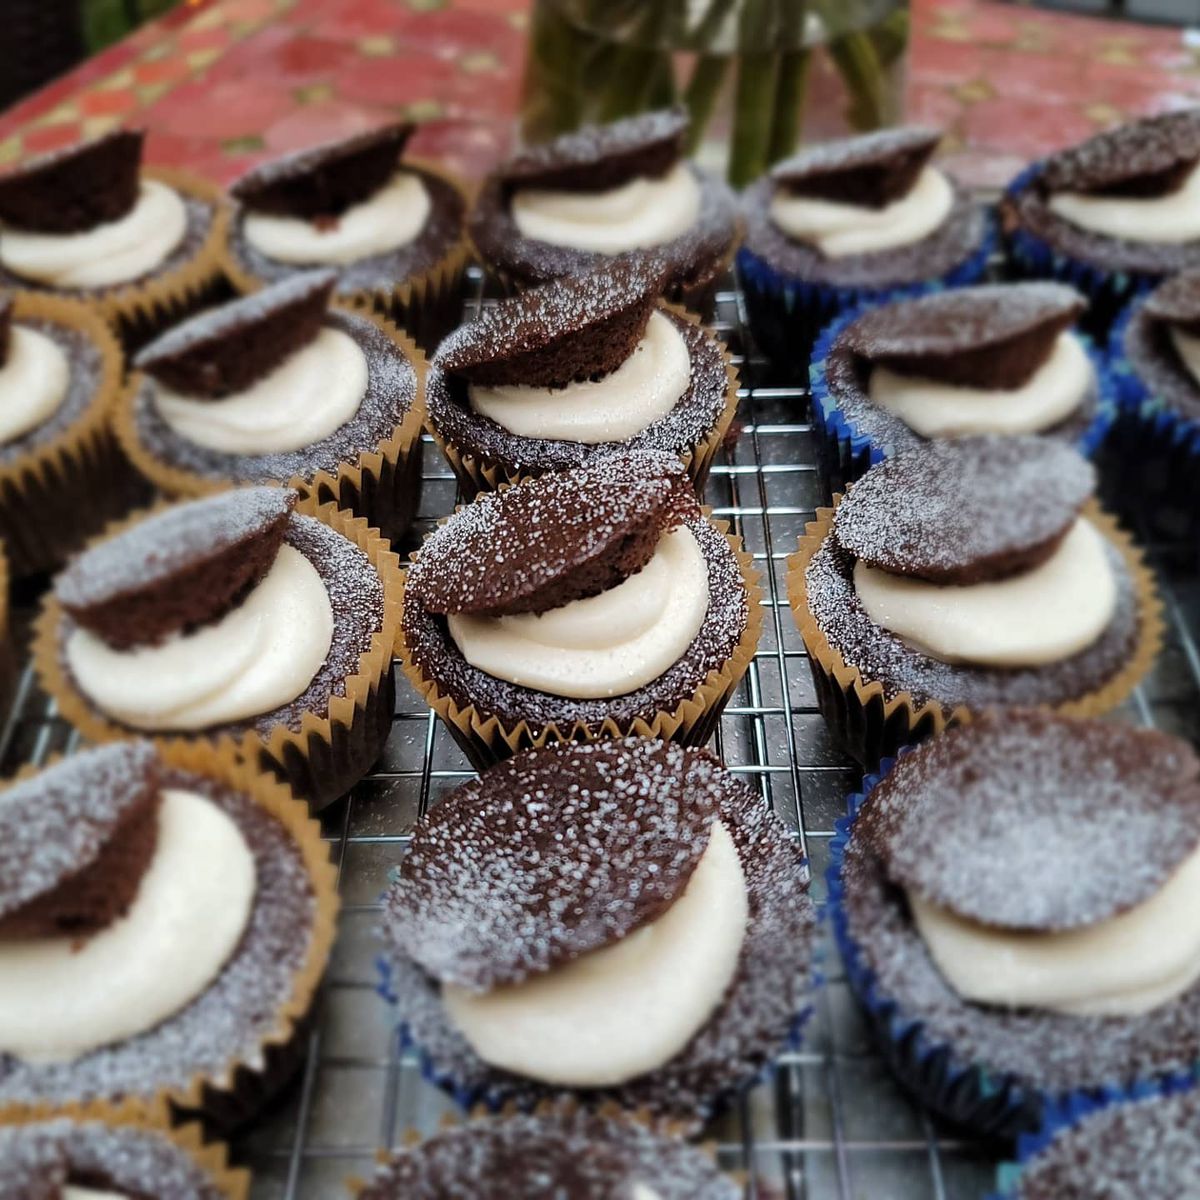 Rows of mini Mama’s stuffed chocolate cakes topped with cream cheese and chocolate cookies is based on a century-old family recipe from the Bronx Bagel Buggy in Chamblee, GA.